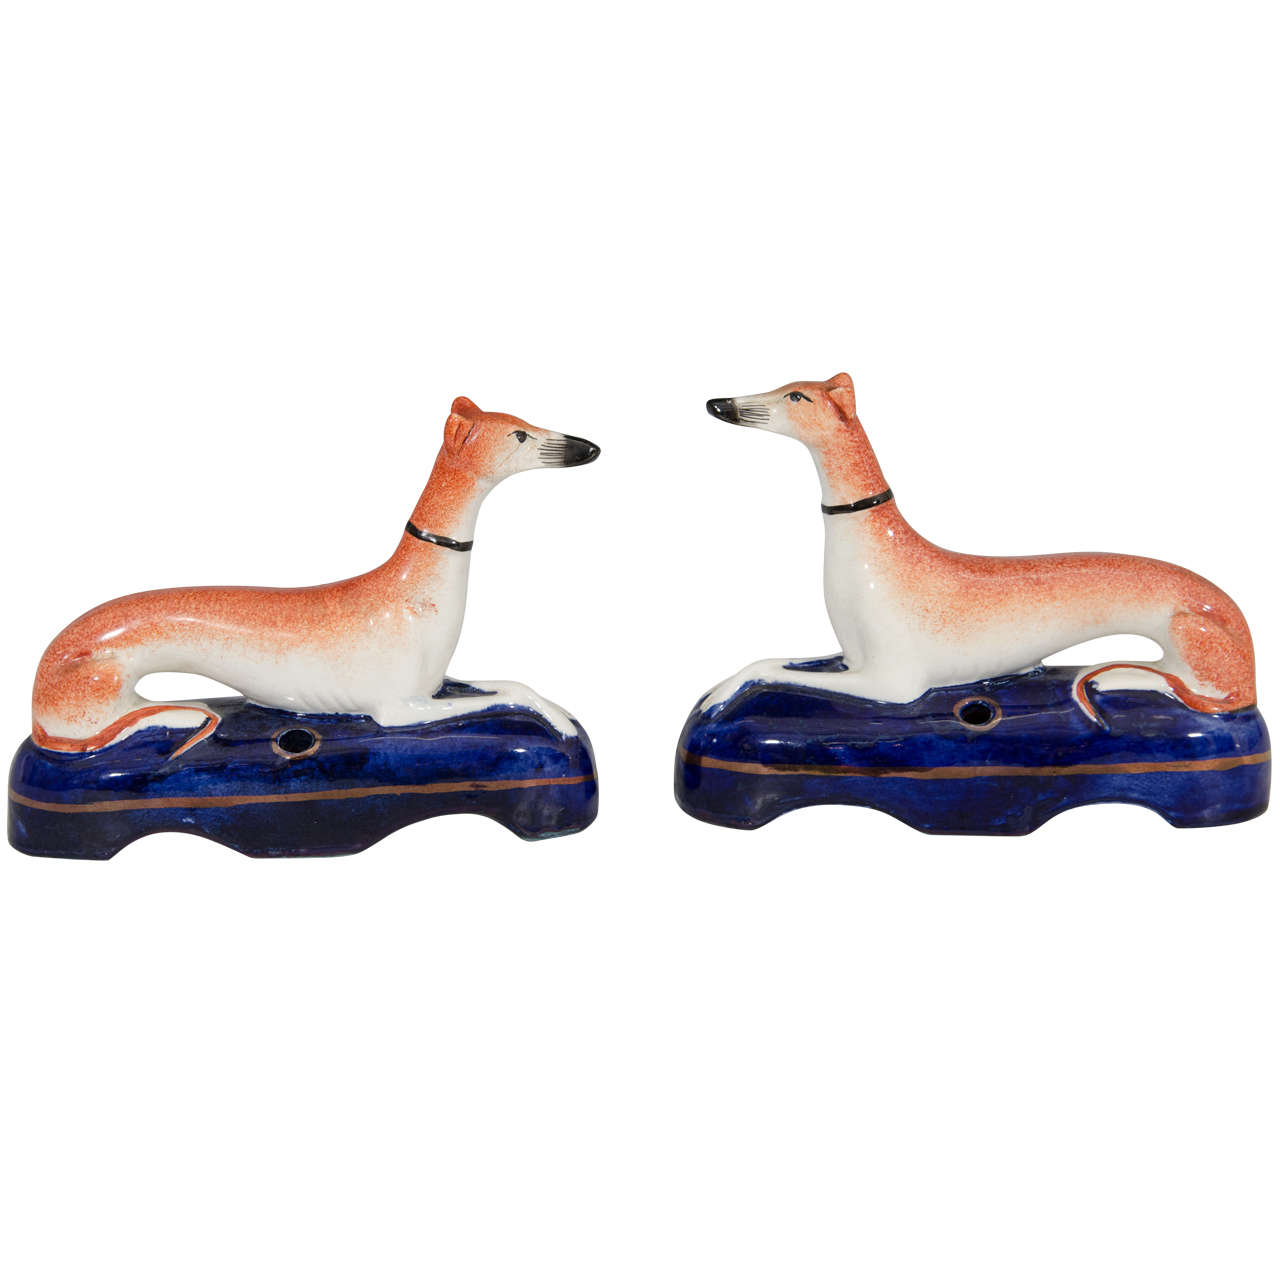 19th Century Staffordshire Greyhound Desk Dogs with Pen Holder Base